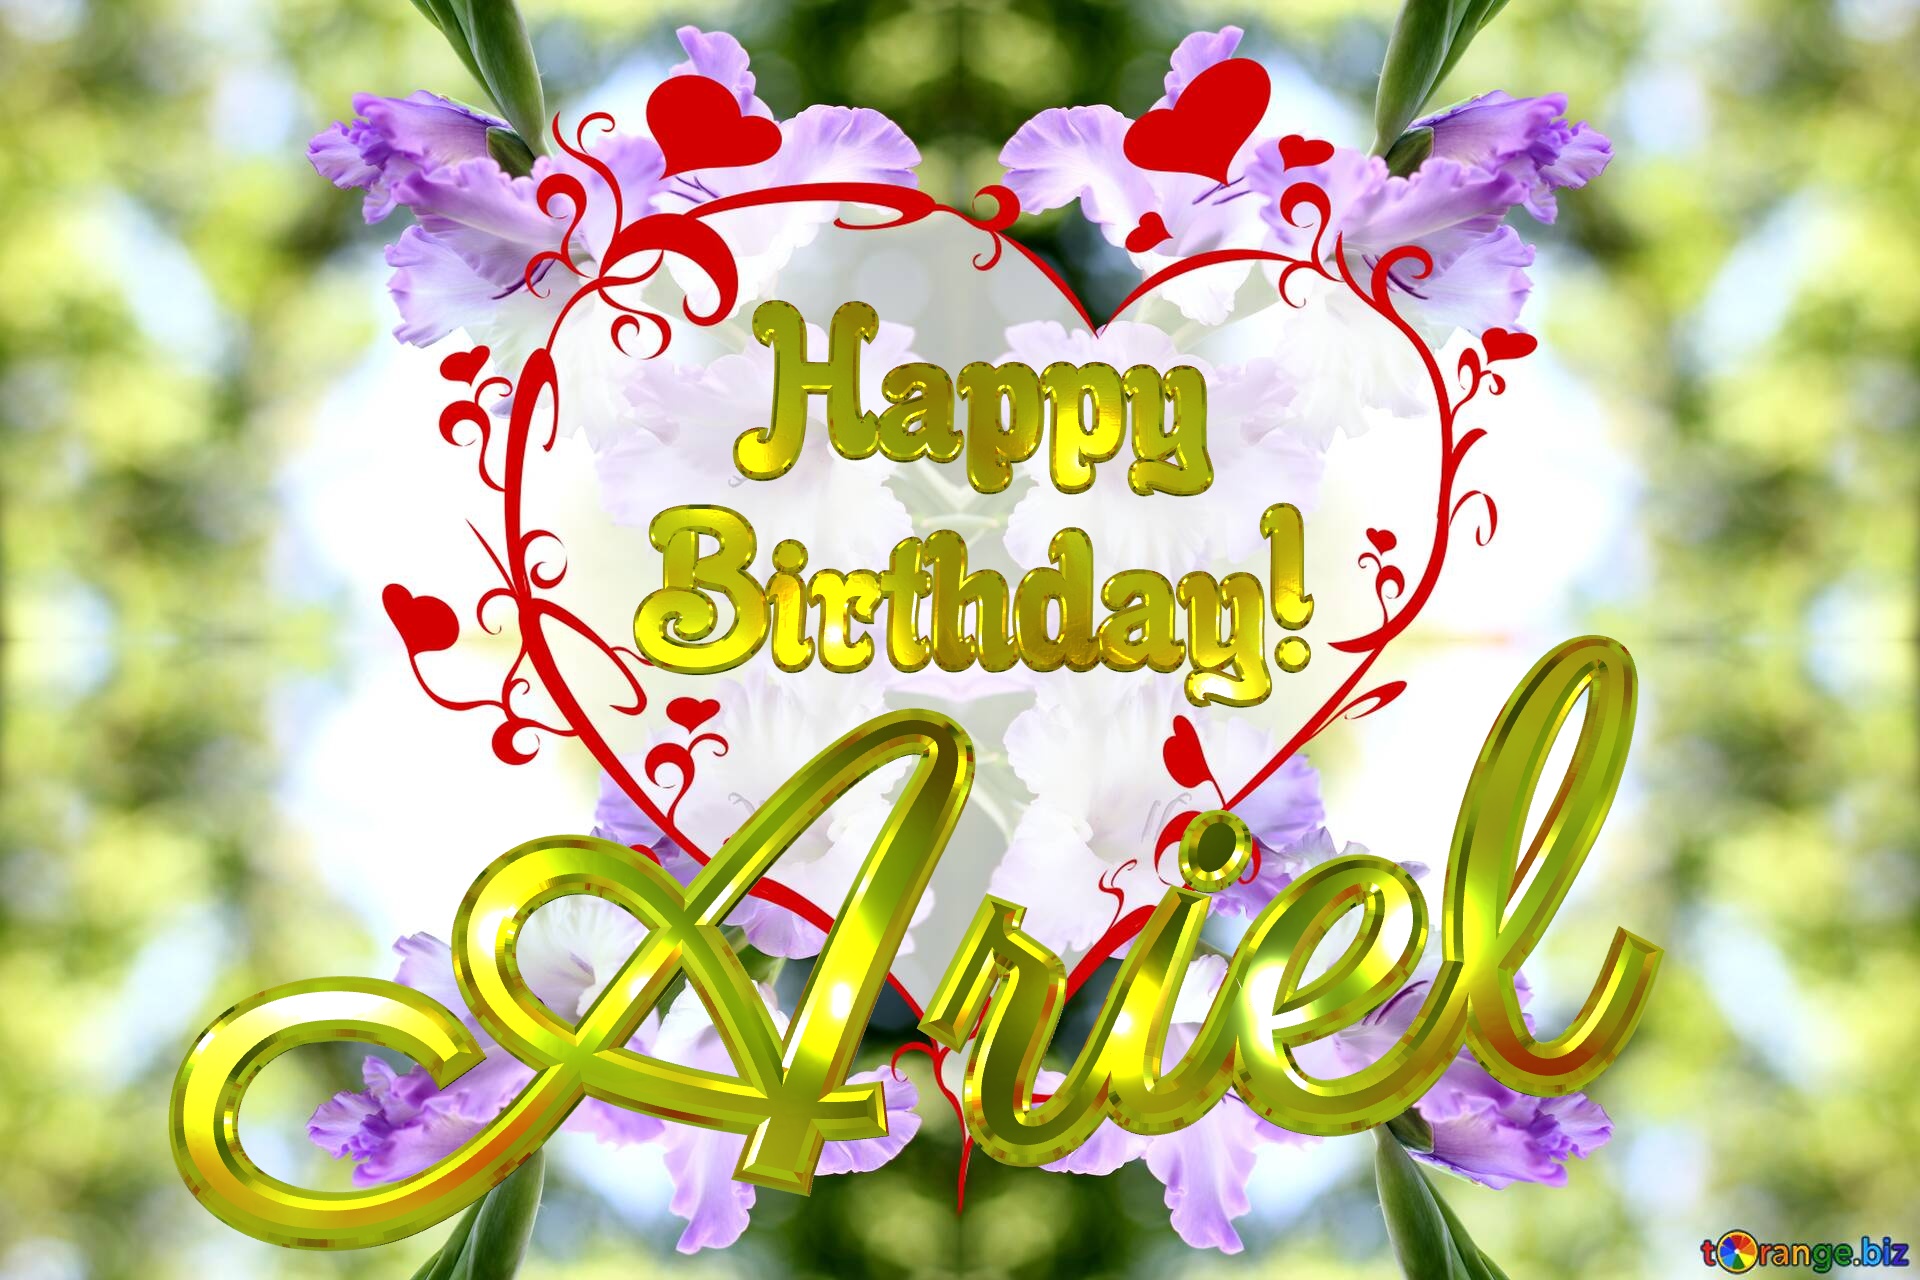 Images Happy Birthday! Ariel The best image. Images for cards the flower gladiolus. №0